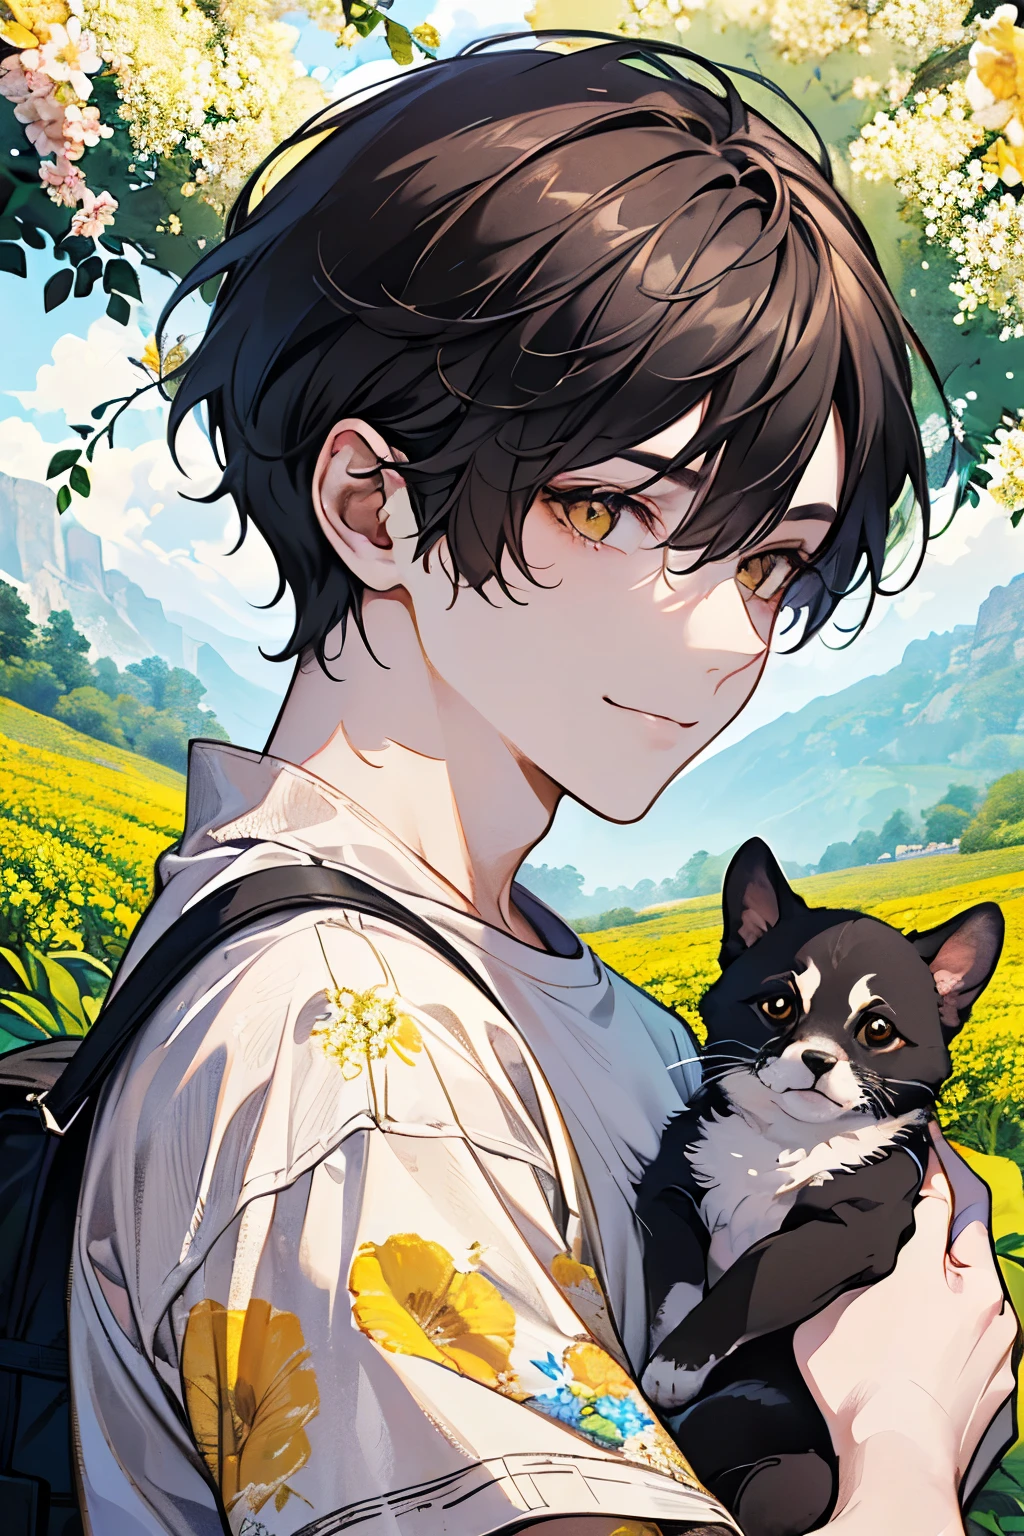 ((young men's:1.1)),(Oversized floral T-shirt:1.35),Prompt: An incredibly charming  carrying a backpack, accompanied by her adorable puppy, enjoying a lovely spring outing surrounded by beautiful yellow flowers and natural scenery. The illustration is in high definition at 4k resolution, with highly-detailed facial features and cartoon-style visuals,smile,(Gazing at each other:1.1).